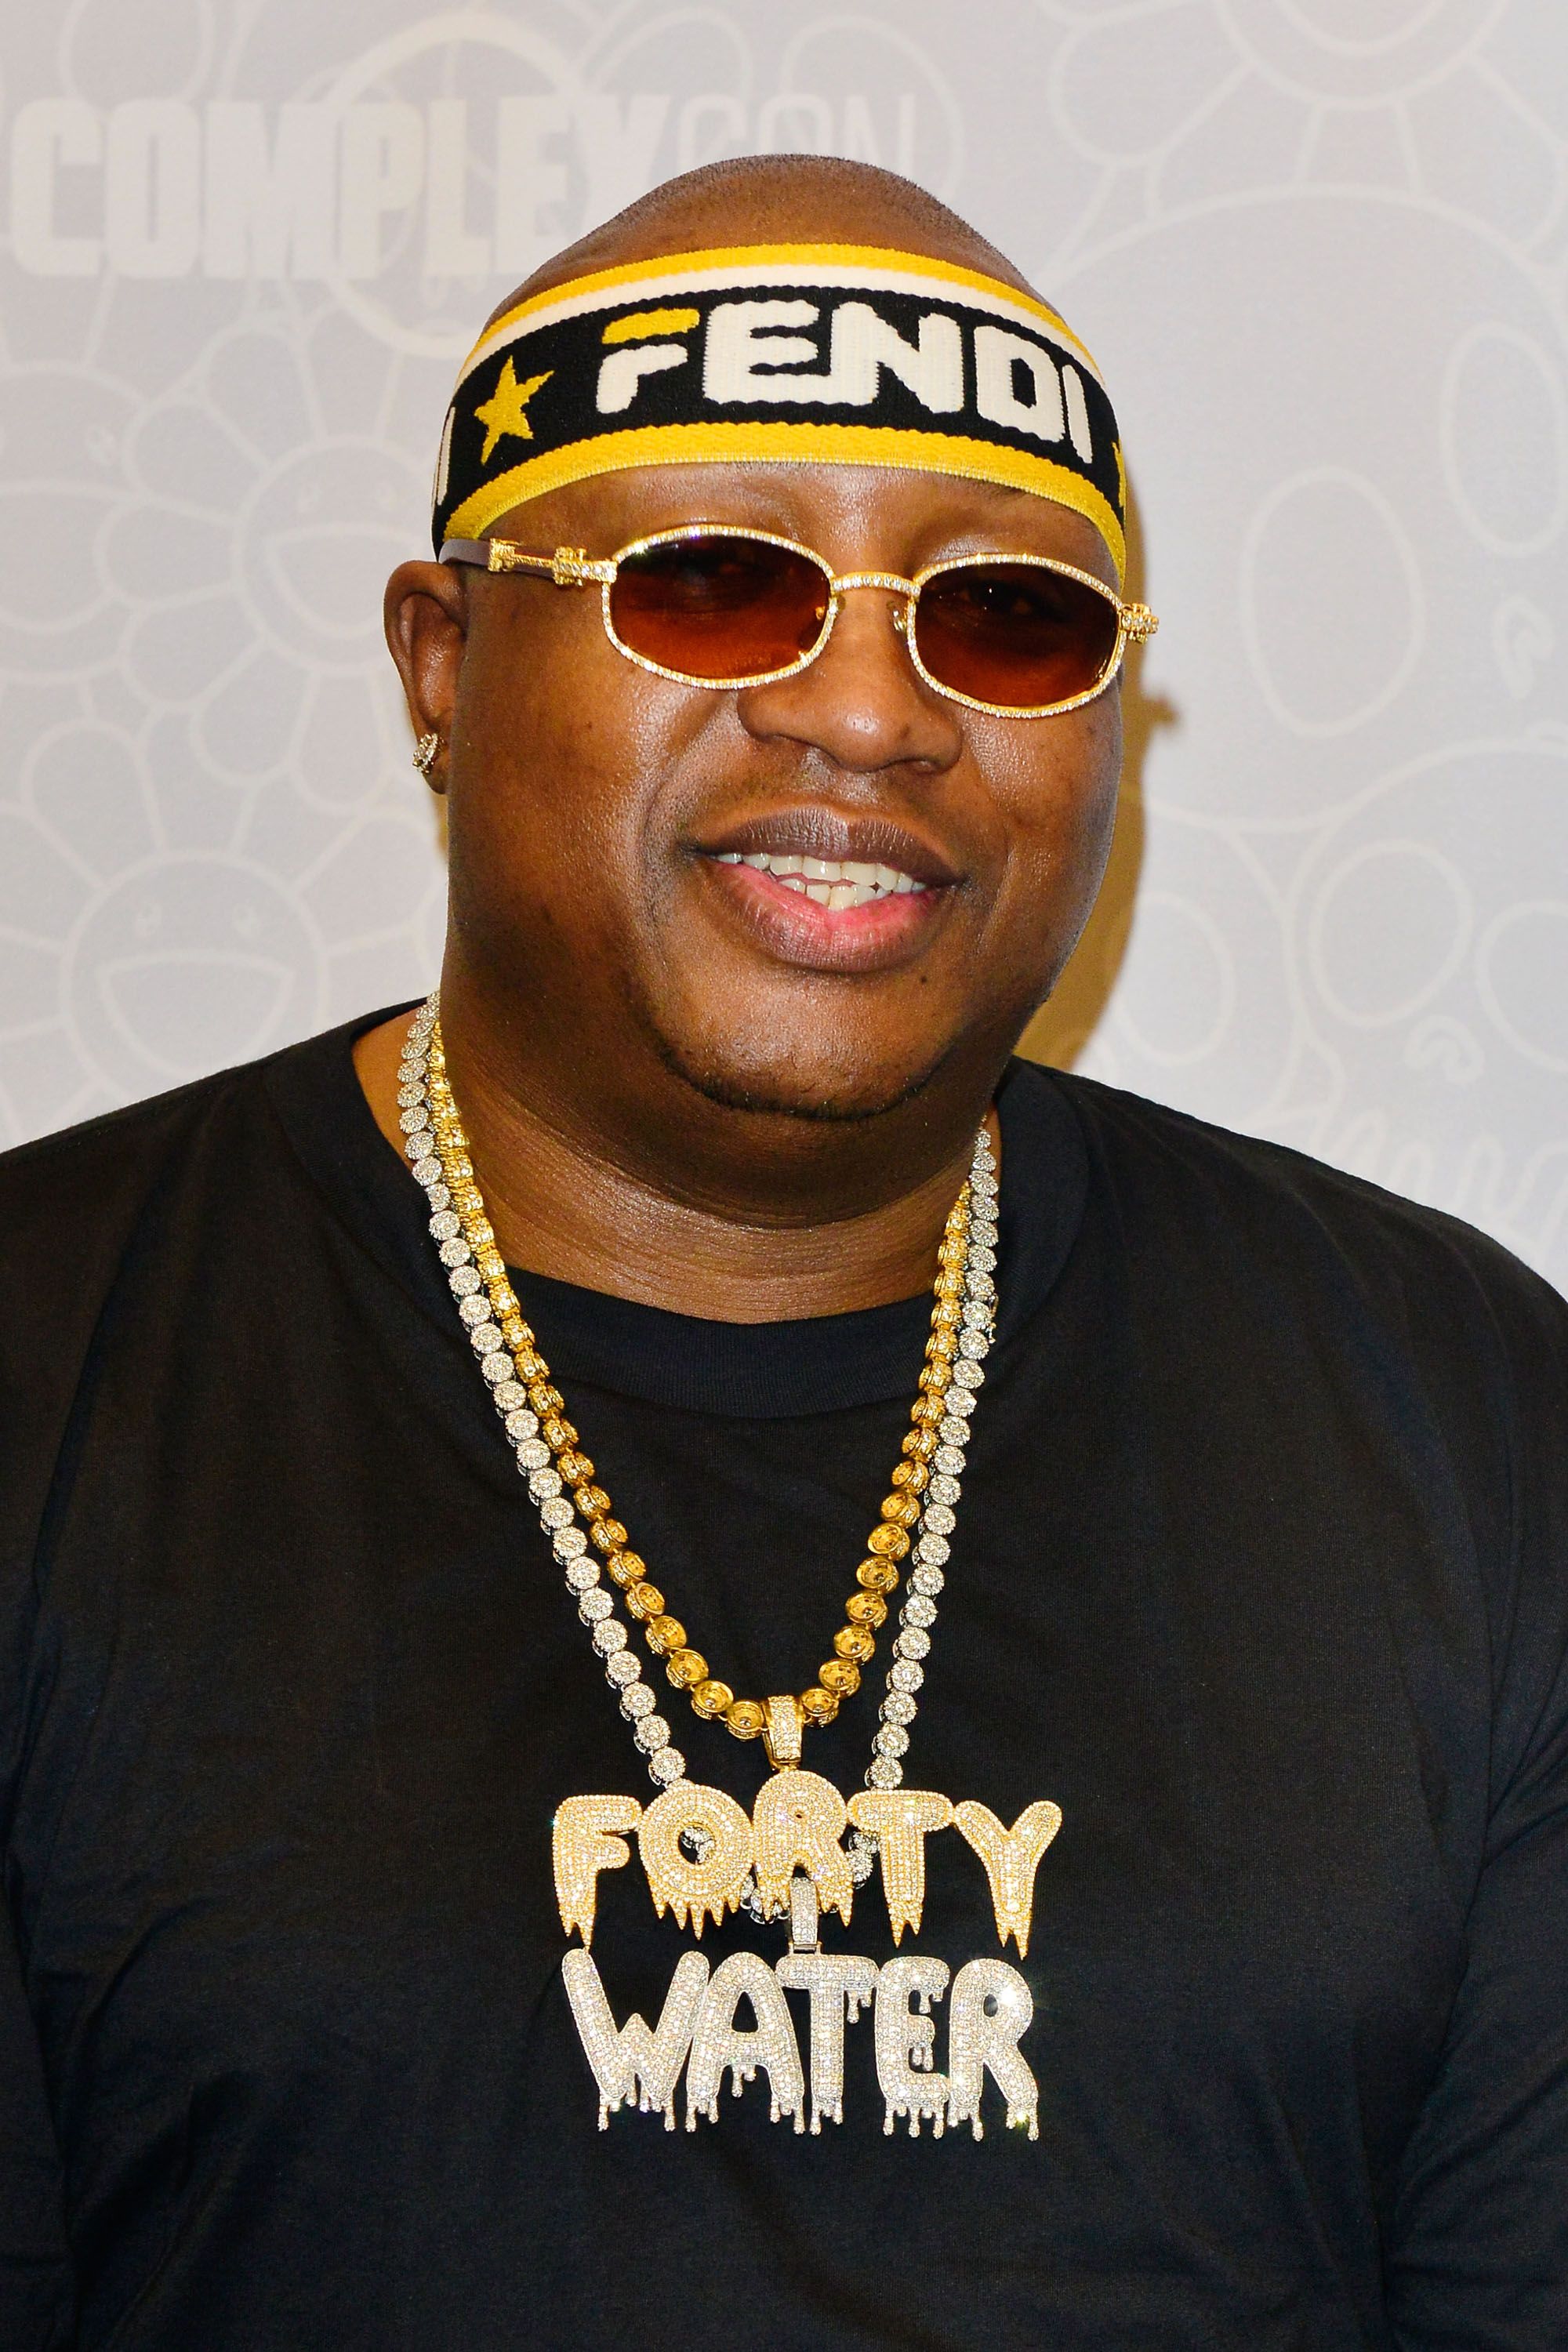 Too Short and E-40 Face Off in Heated Last Verzuz Battle of 2020